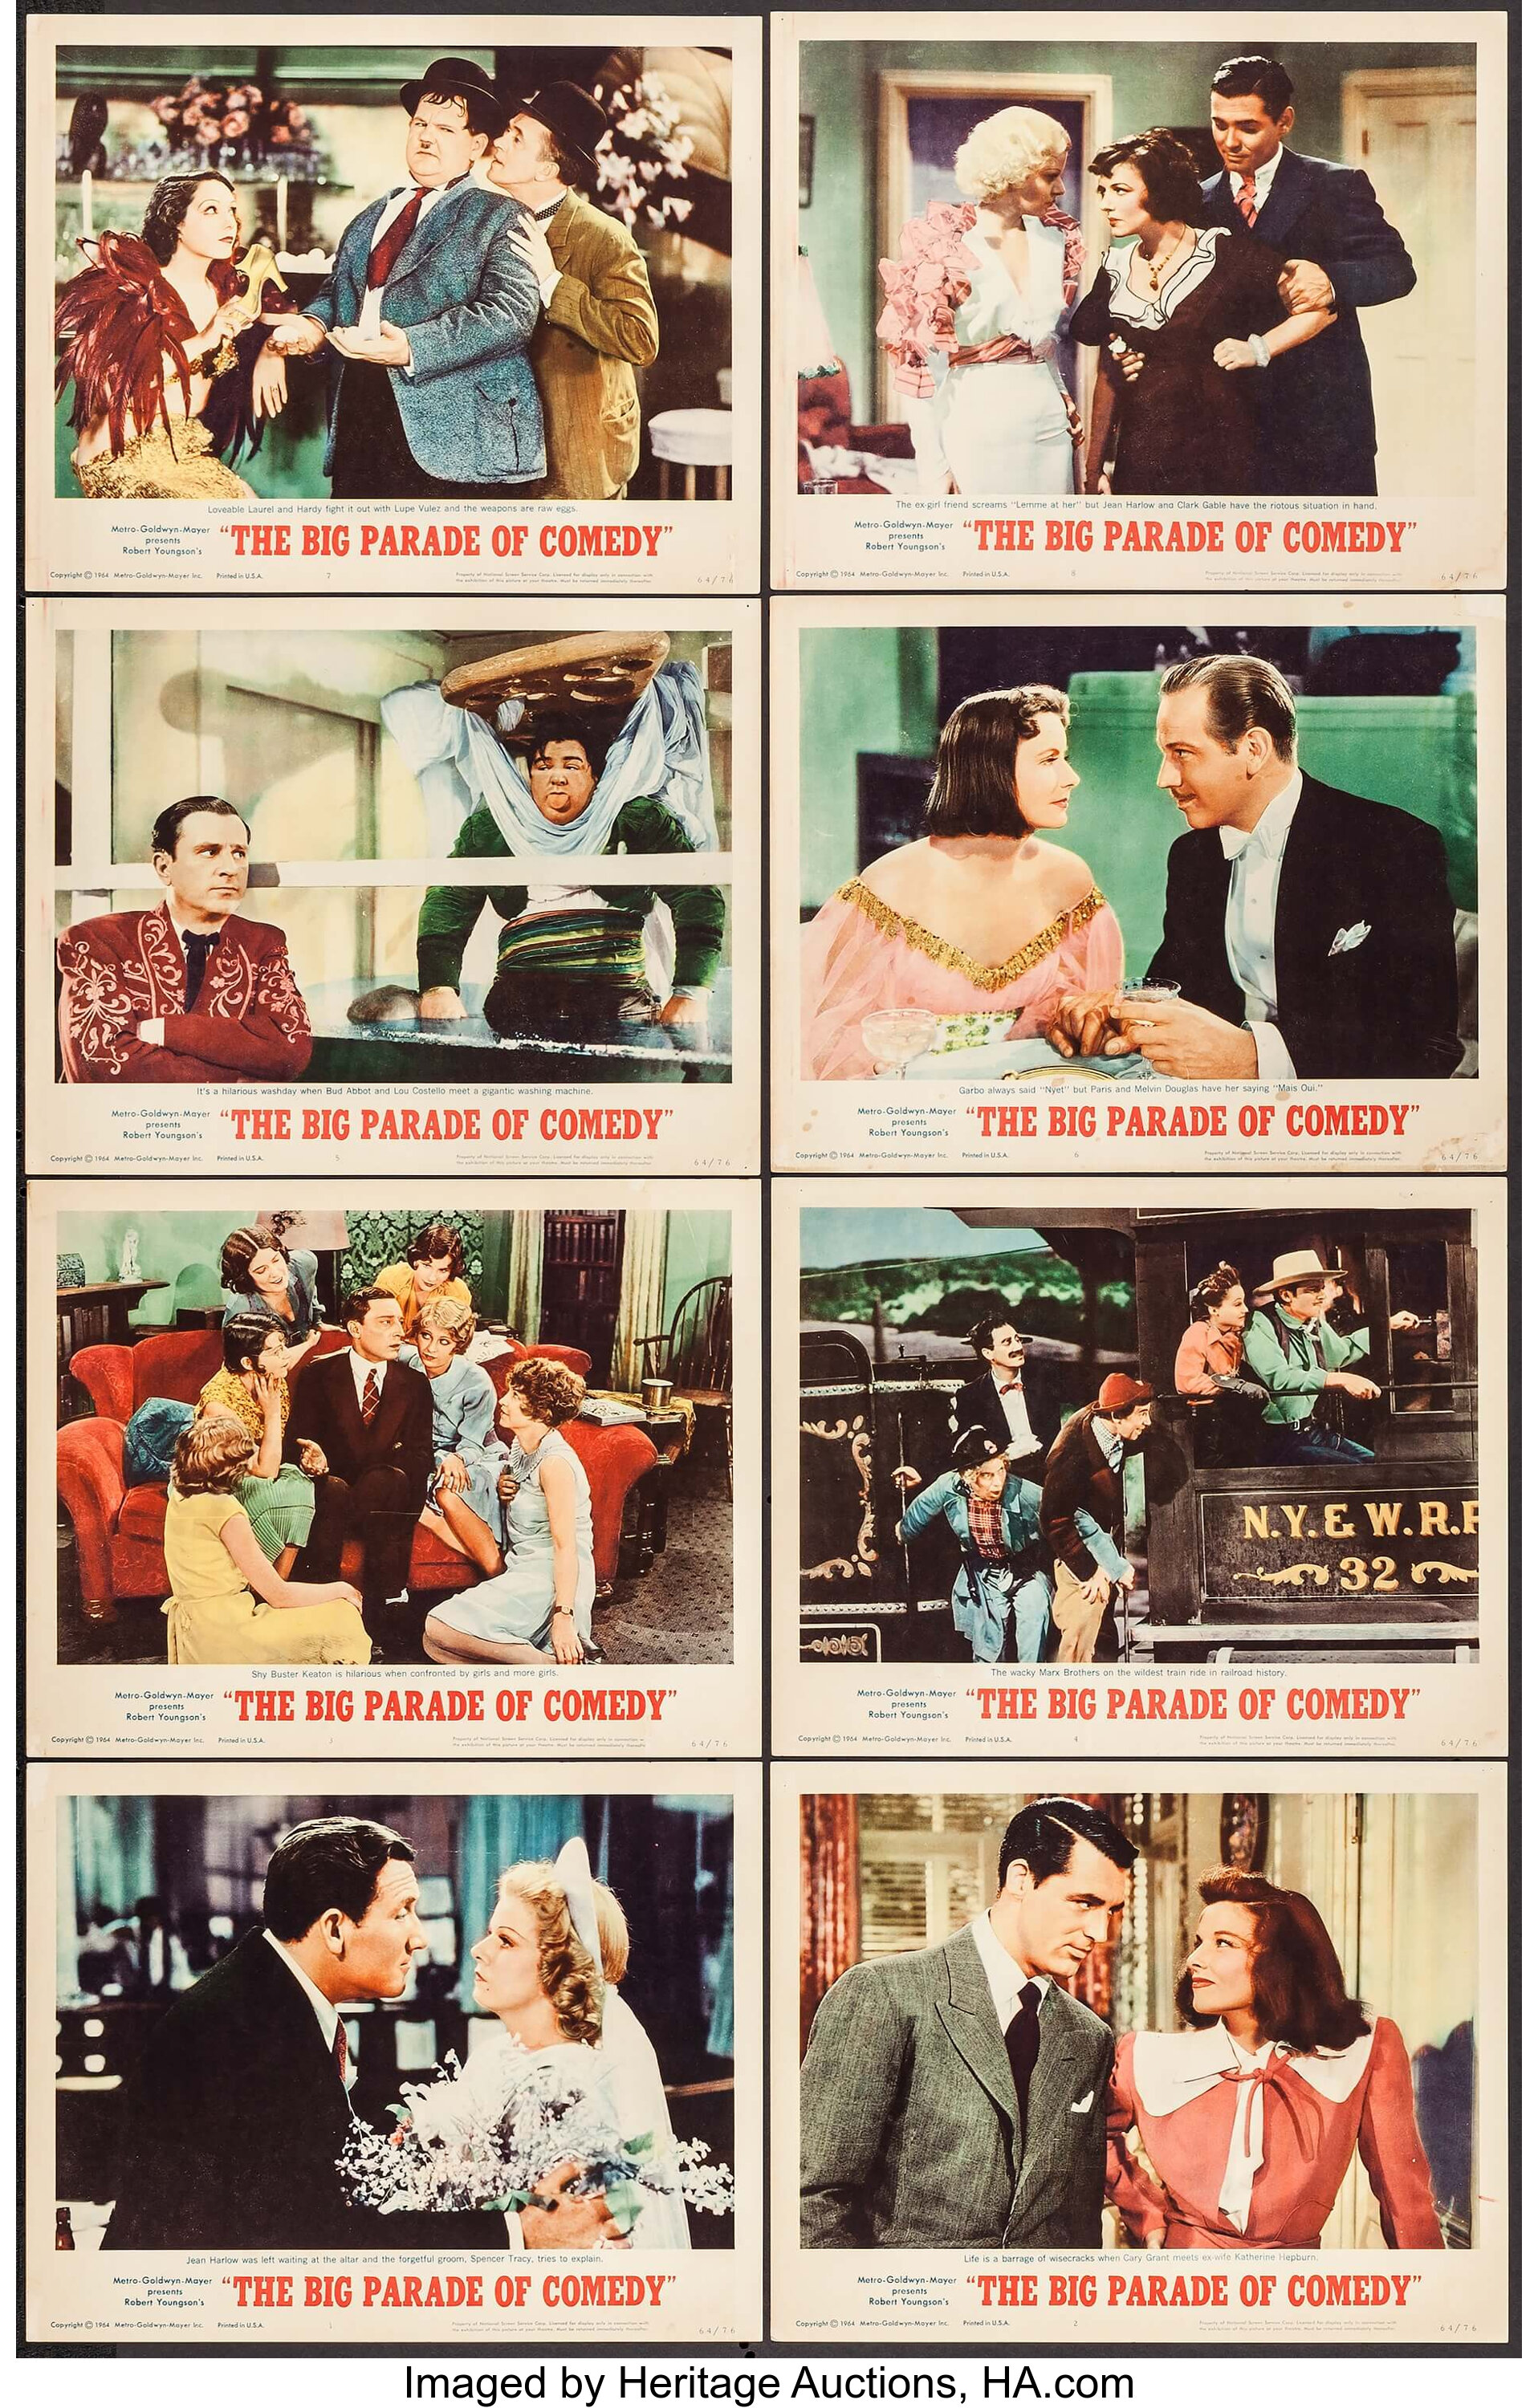 The Big Parade Of Comedy Mgm 1964 Lobby Card Set Of 8 11 X Lot 54042 Heritage Auctions 7514